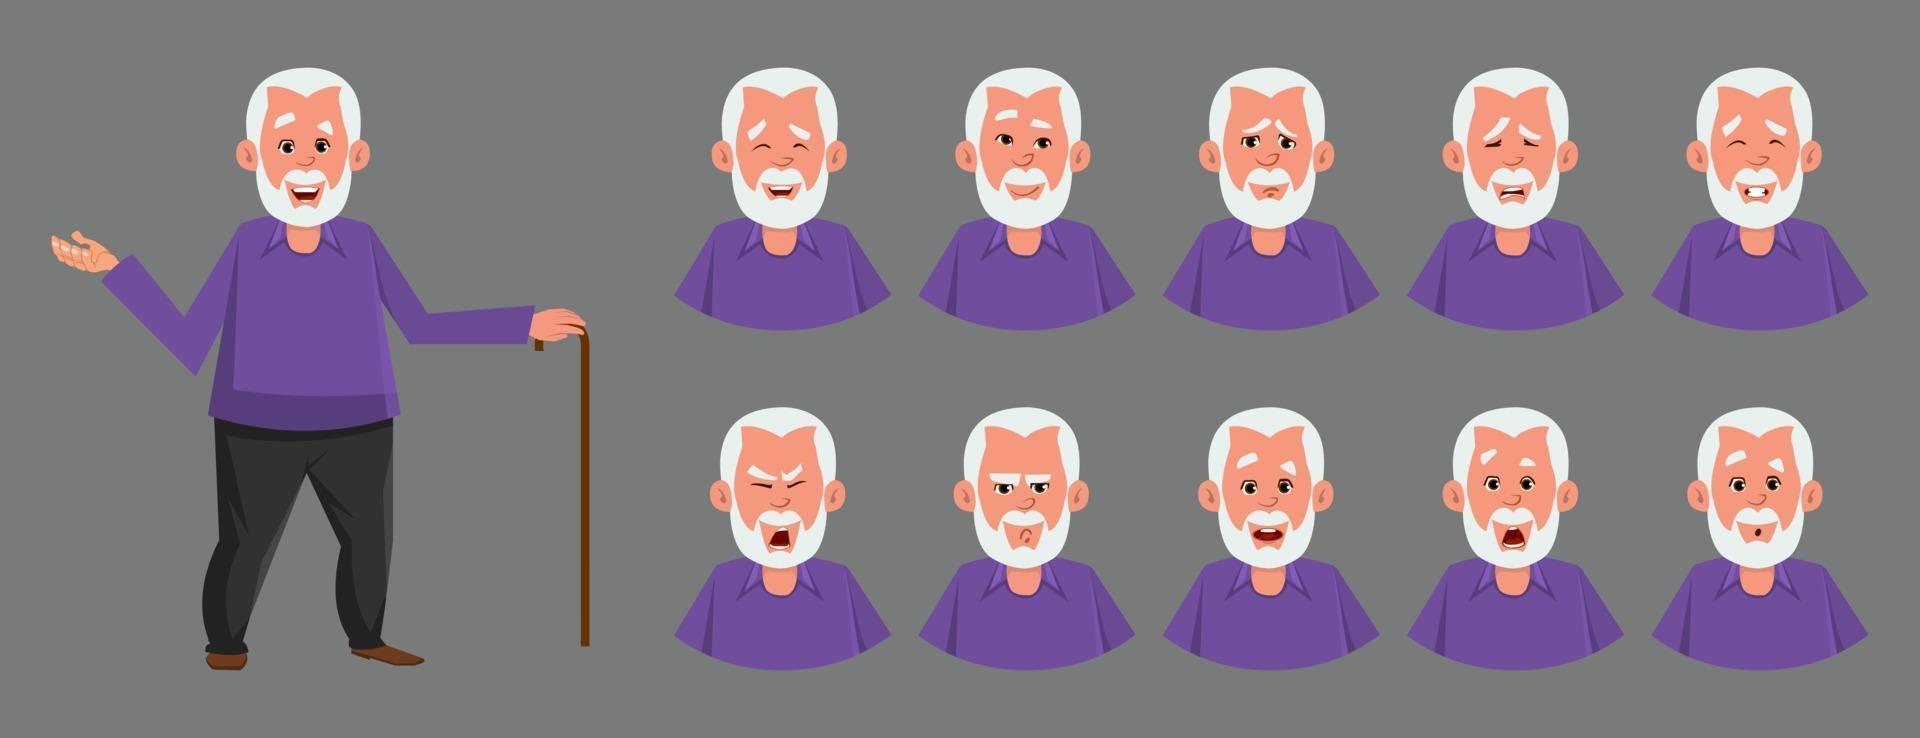 Old man character with various emotion or expression. different emotion or expression set for custom character design, motion or animation. vector